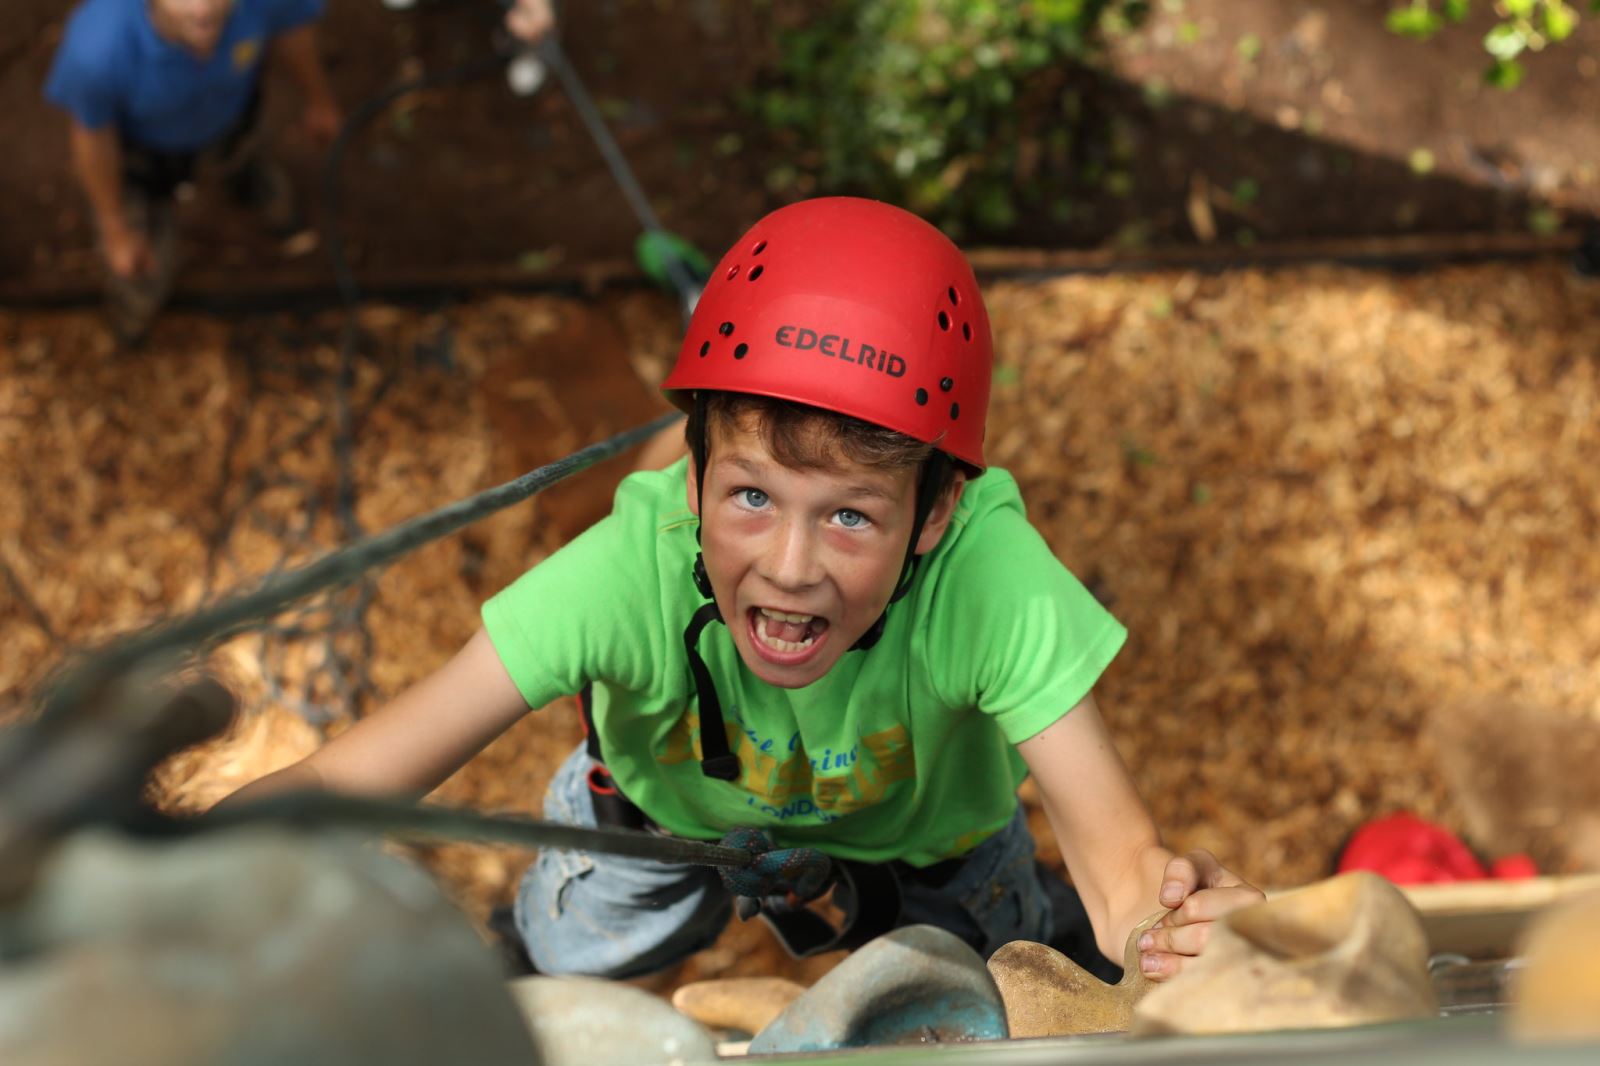 Child looking up as he rock climbs